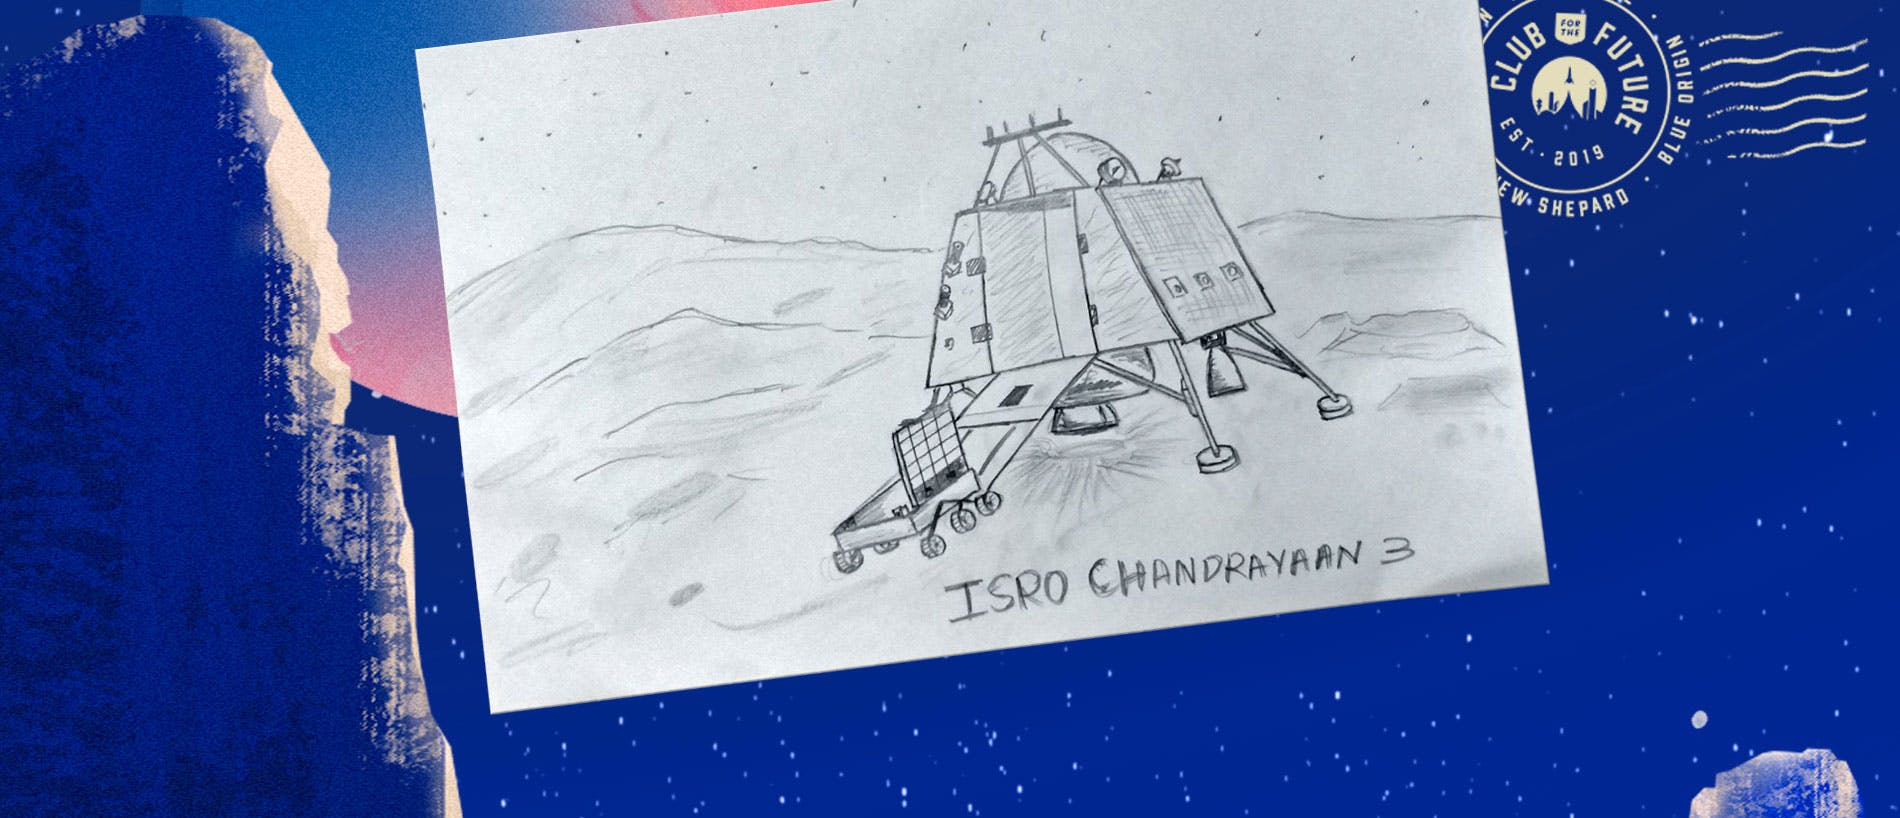 A postcard with a drawing of a lander